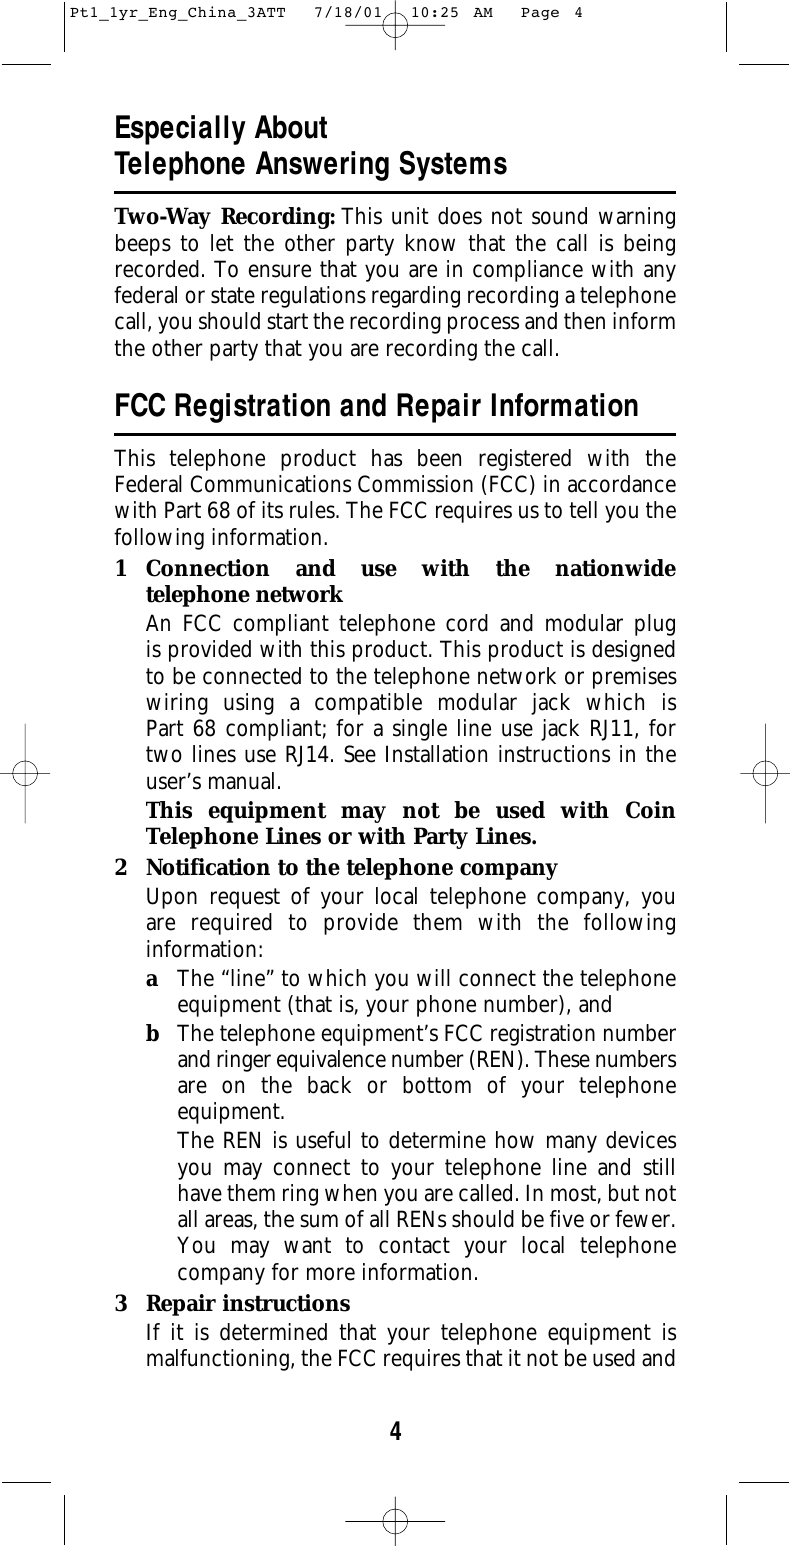 4Especially About Telephone Answering SystemsTwo-Way Recording: This unit does not sound warningbeeps to let the other party know that the call is beingrecorded. To ensure that you are in compliance with anyfederal or state regulations regarding recording a telephonecall, you should start the recording process and then informthe other party that you are recording the call.FCC Registration and Repair InformationThis telephone product has been registered with theFederal Communications Commission (FCC) in accordancewith Part 68 of its rules. The FCC requires us to tell you thefollowing information.1 Connection and use with the nationwide telephone networkAn FCC compliant telephone cord and modular plug is provided with this product. This product is designedto be connected to the telephone network or premiseswiring using a compatible modular jack which is Part 68 compliant; for a single line use jack RJ11, fortwo lines use RJ14. See Installation instructions in theuser’s manual.This equipment may not be used with CoinTelephone Lines or with Party Lines.2 Notification to the telephone companyUpon request of your local telephone company, you are required to provide them with the following information:aThe “line” to which you will connect the telephoneequipment (that is, your phone number), andbThe telephone equipment’s FCC registration numberand ringer equivalence number (REN). These numbersare on the back or bottom of your telephone equipment.The REN is useful to determine how many devicesyou may connect to your telephone line and stillhave them ring when you are called. In most, but notall areas, the sum of all RENs should be five or fewer.You may want to contact your local telephonecompany for more information.3 Repair instructionsIf it is determined that your telephone equipment is malfunctioning, the FCC requires that it not be used andPt1_1yr_Eng_China_3ATT  7/18/01  10:25 AM  Page 4